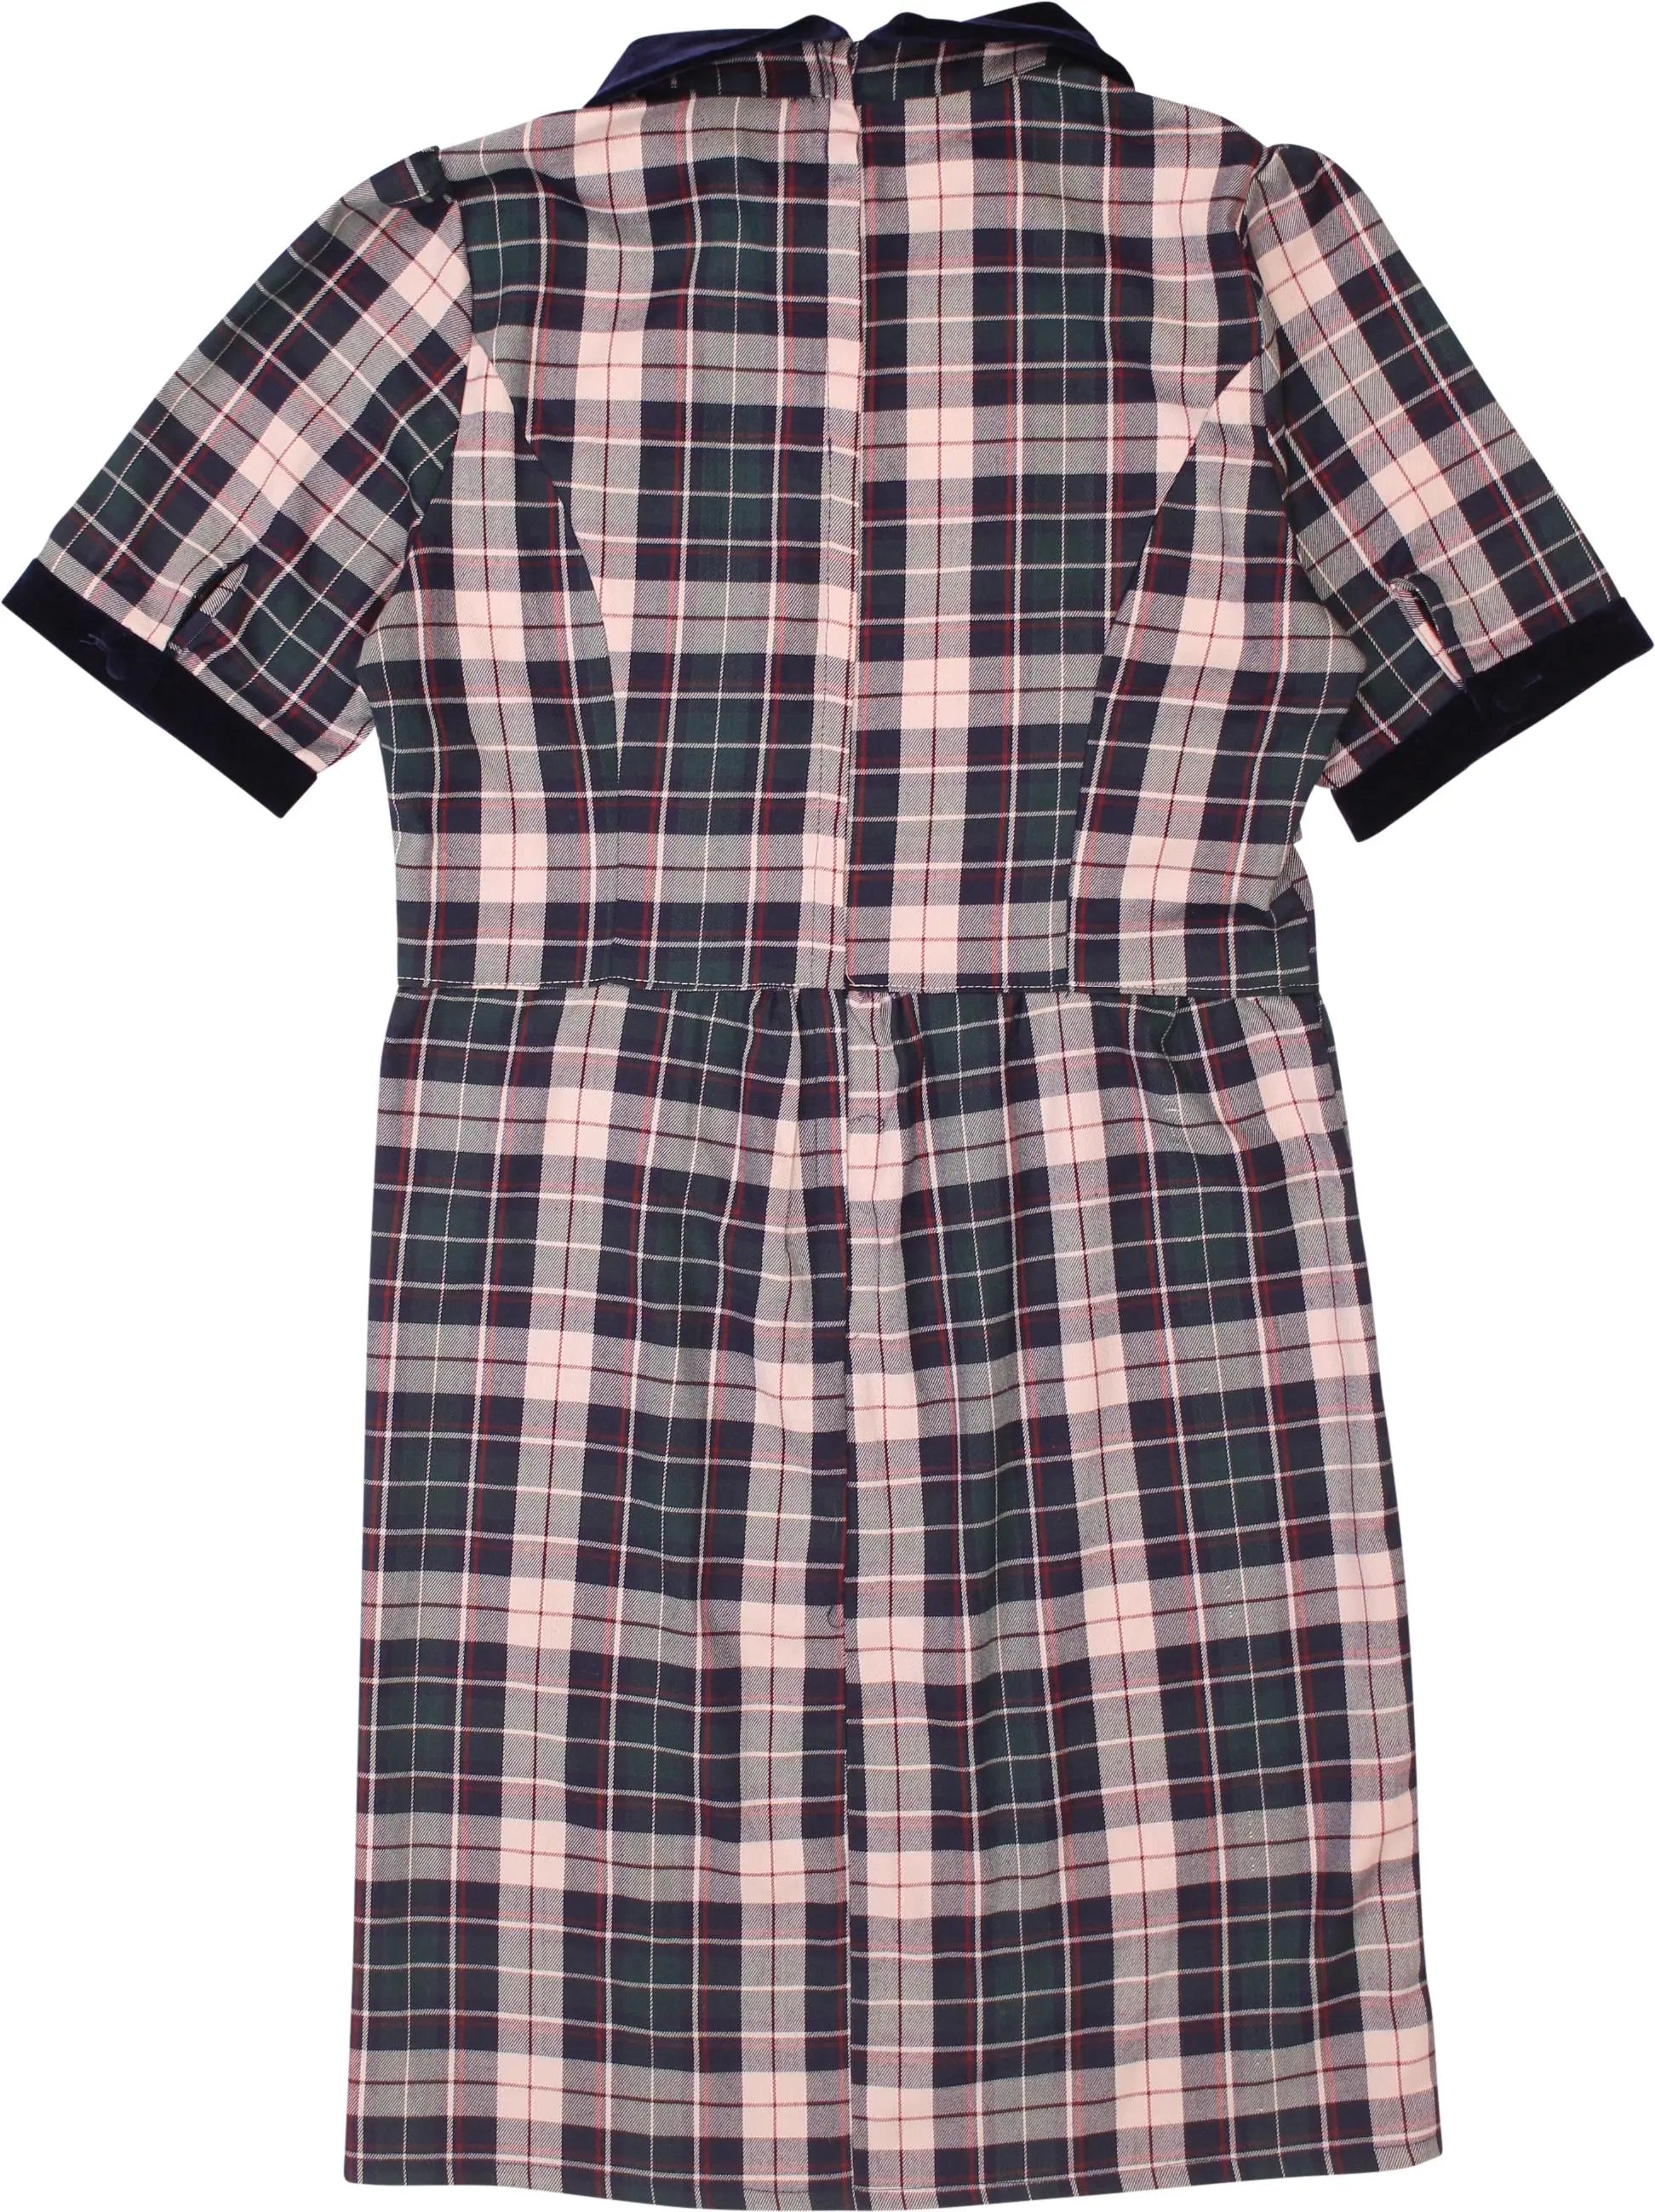 Collectif Vintage - Retro 60s Style Checkered Dress- ThriftTale.com - Vintage and second handclothing